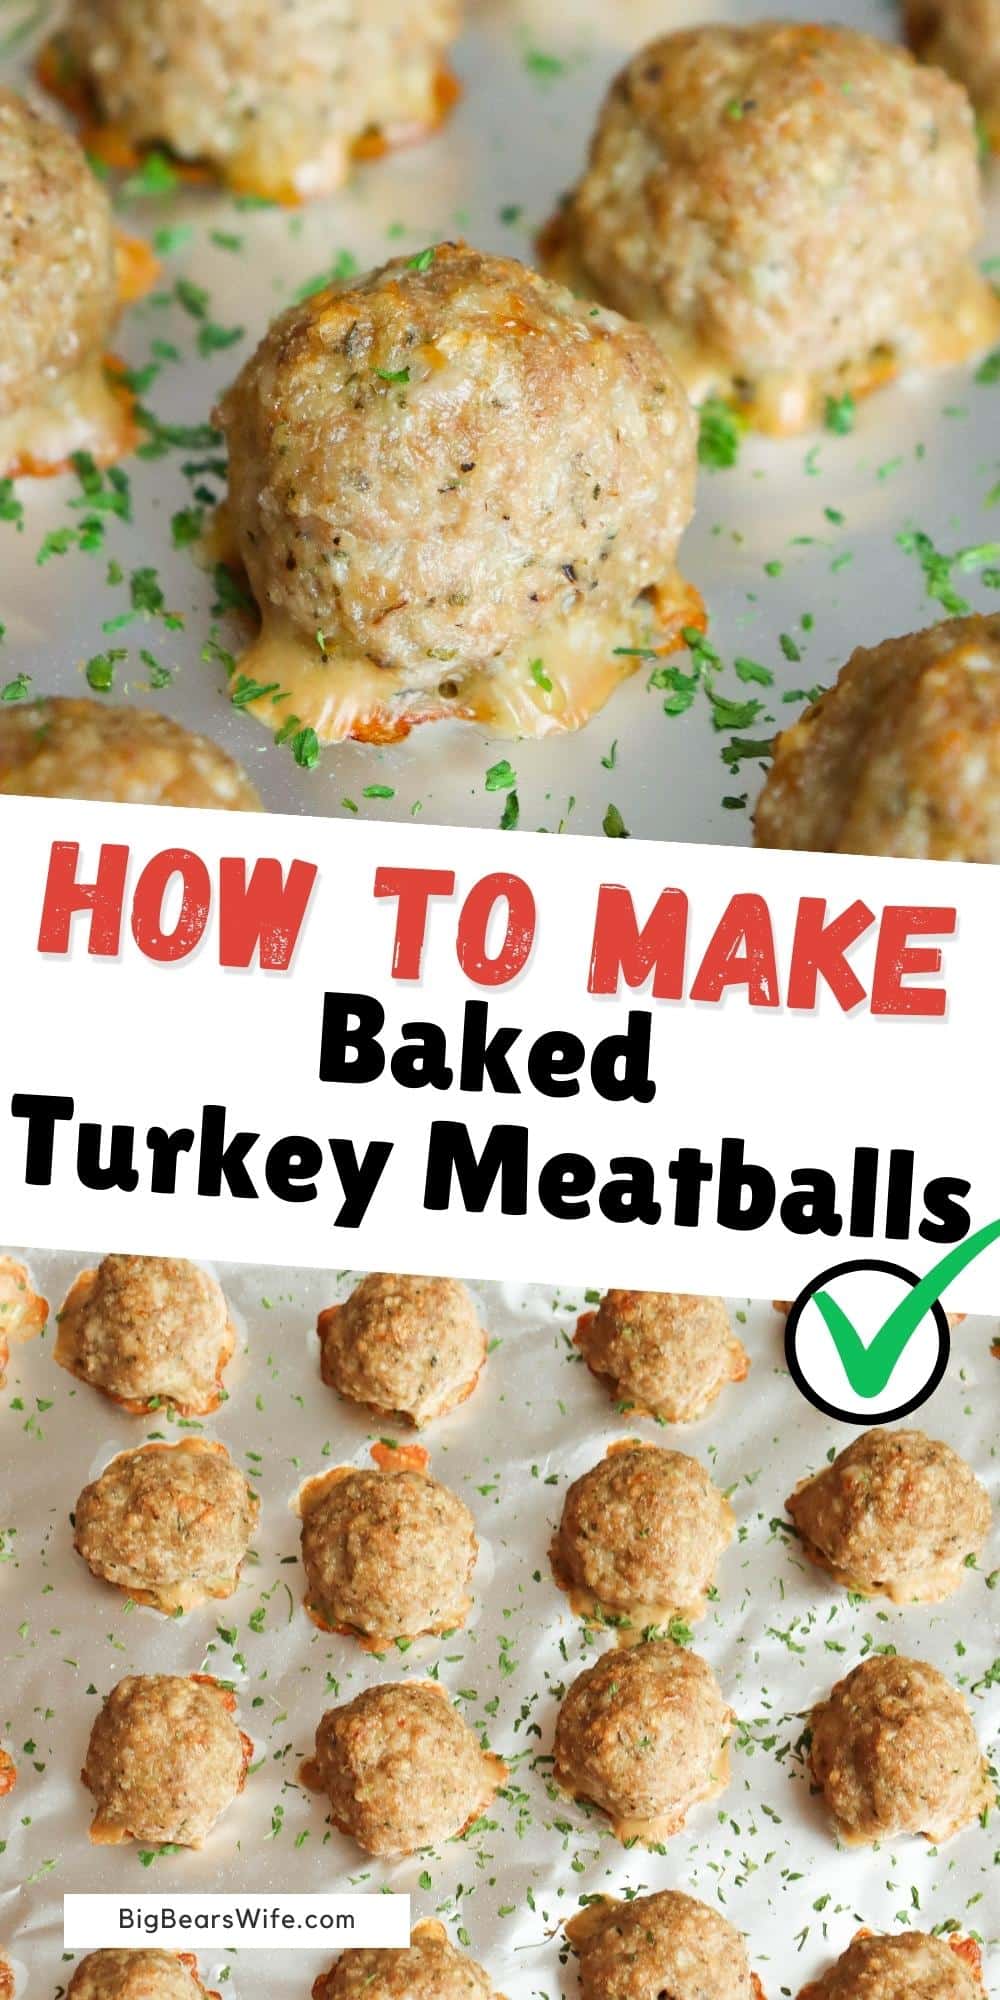 These Baked Turkey Meatballs are perfect for spaghetti and meatballs, slow cooker BBQ meatballs, Meatballs in sauce, meatball subs and so much more!  via @bigbearswife